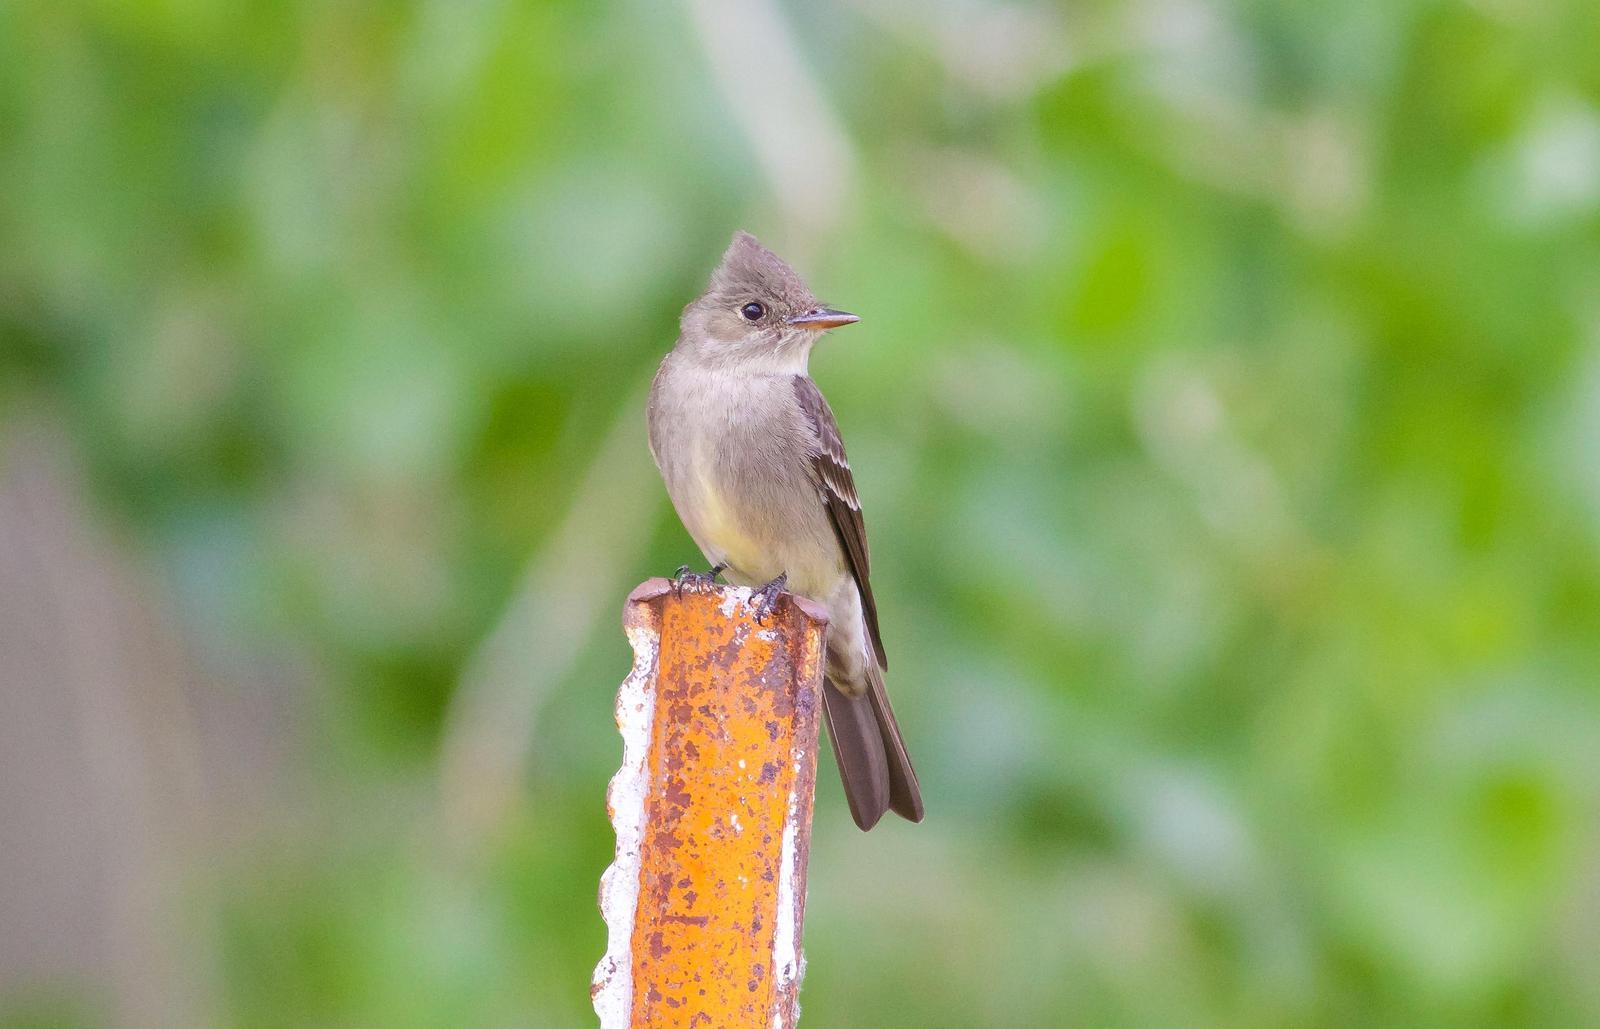 Western Wood-Pewee Photo by Tom Ford-Hutchinson